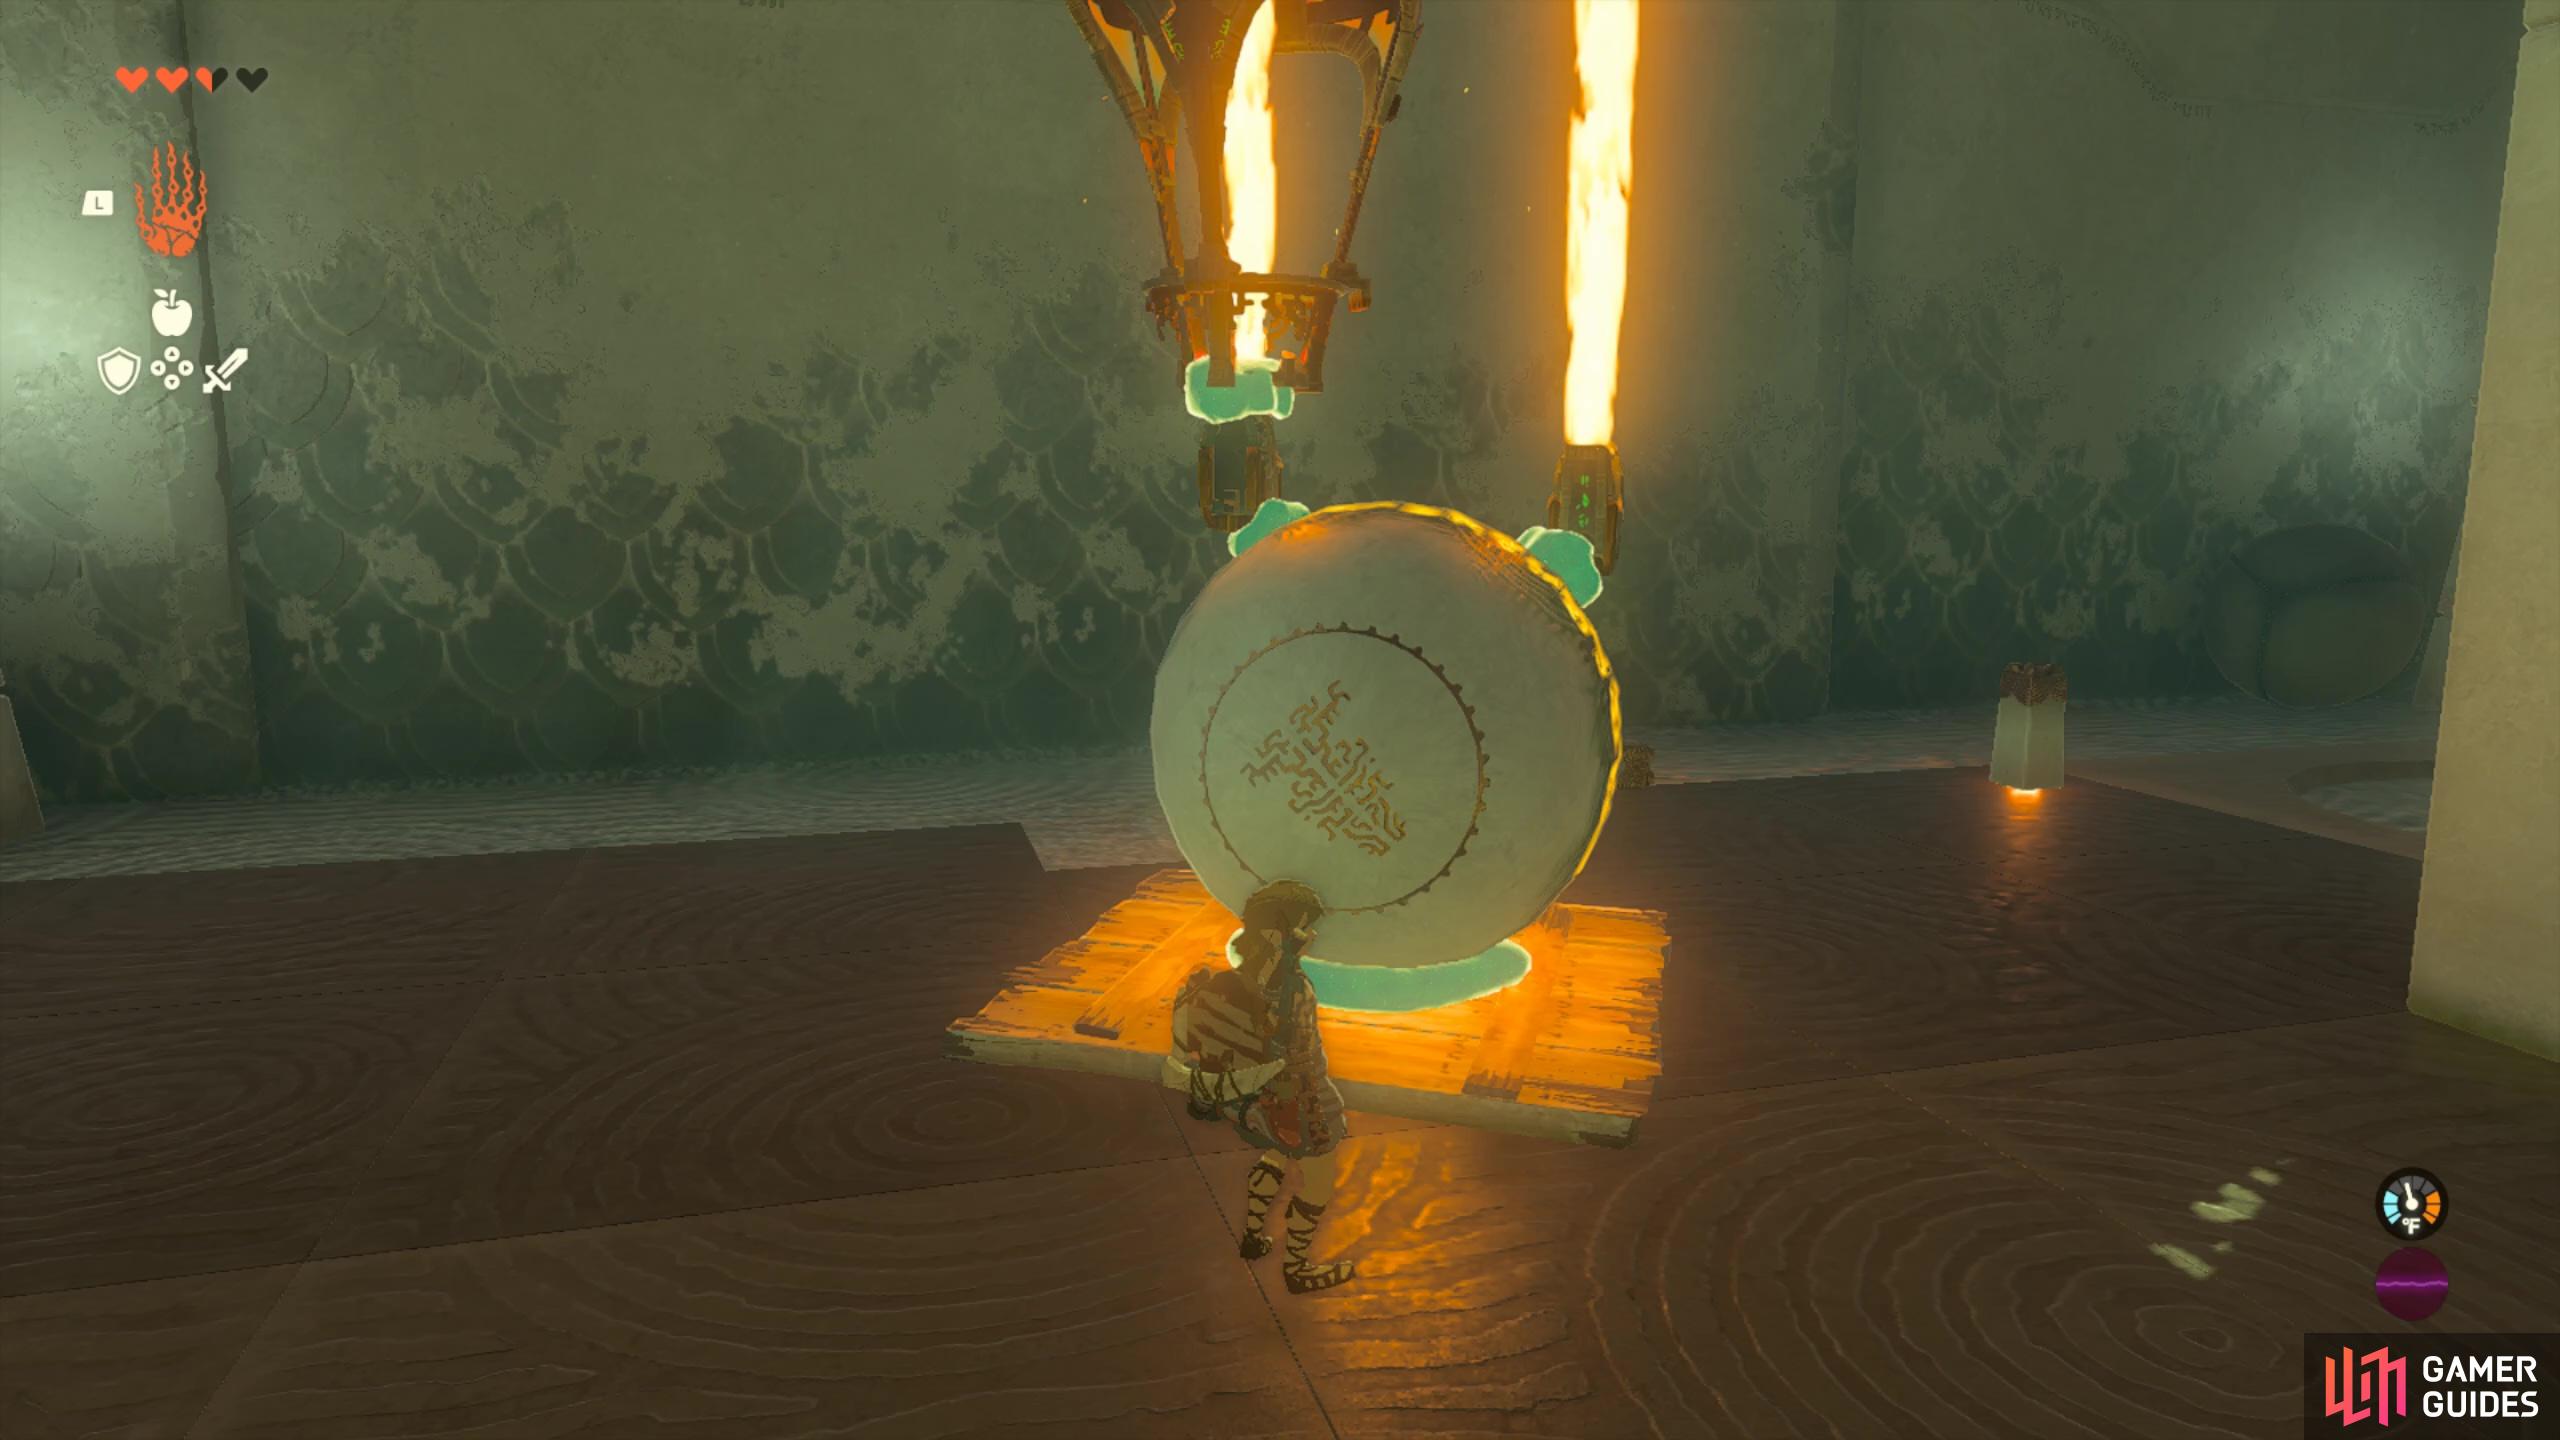 The flame emitters can be used to heat up the balloon zonai devices!